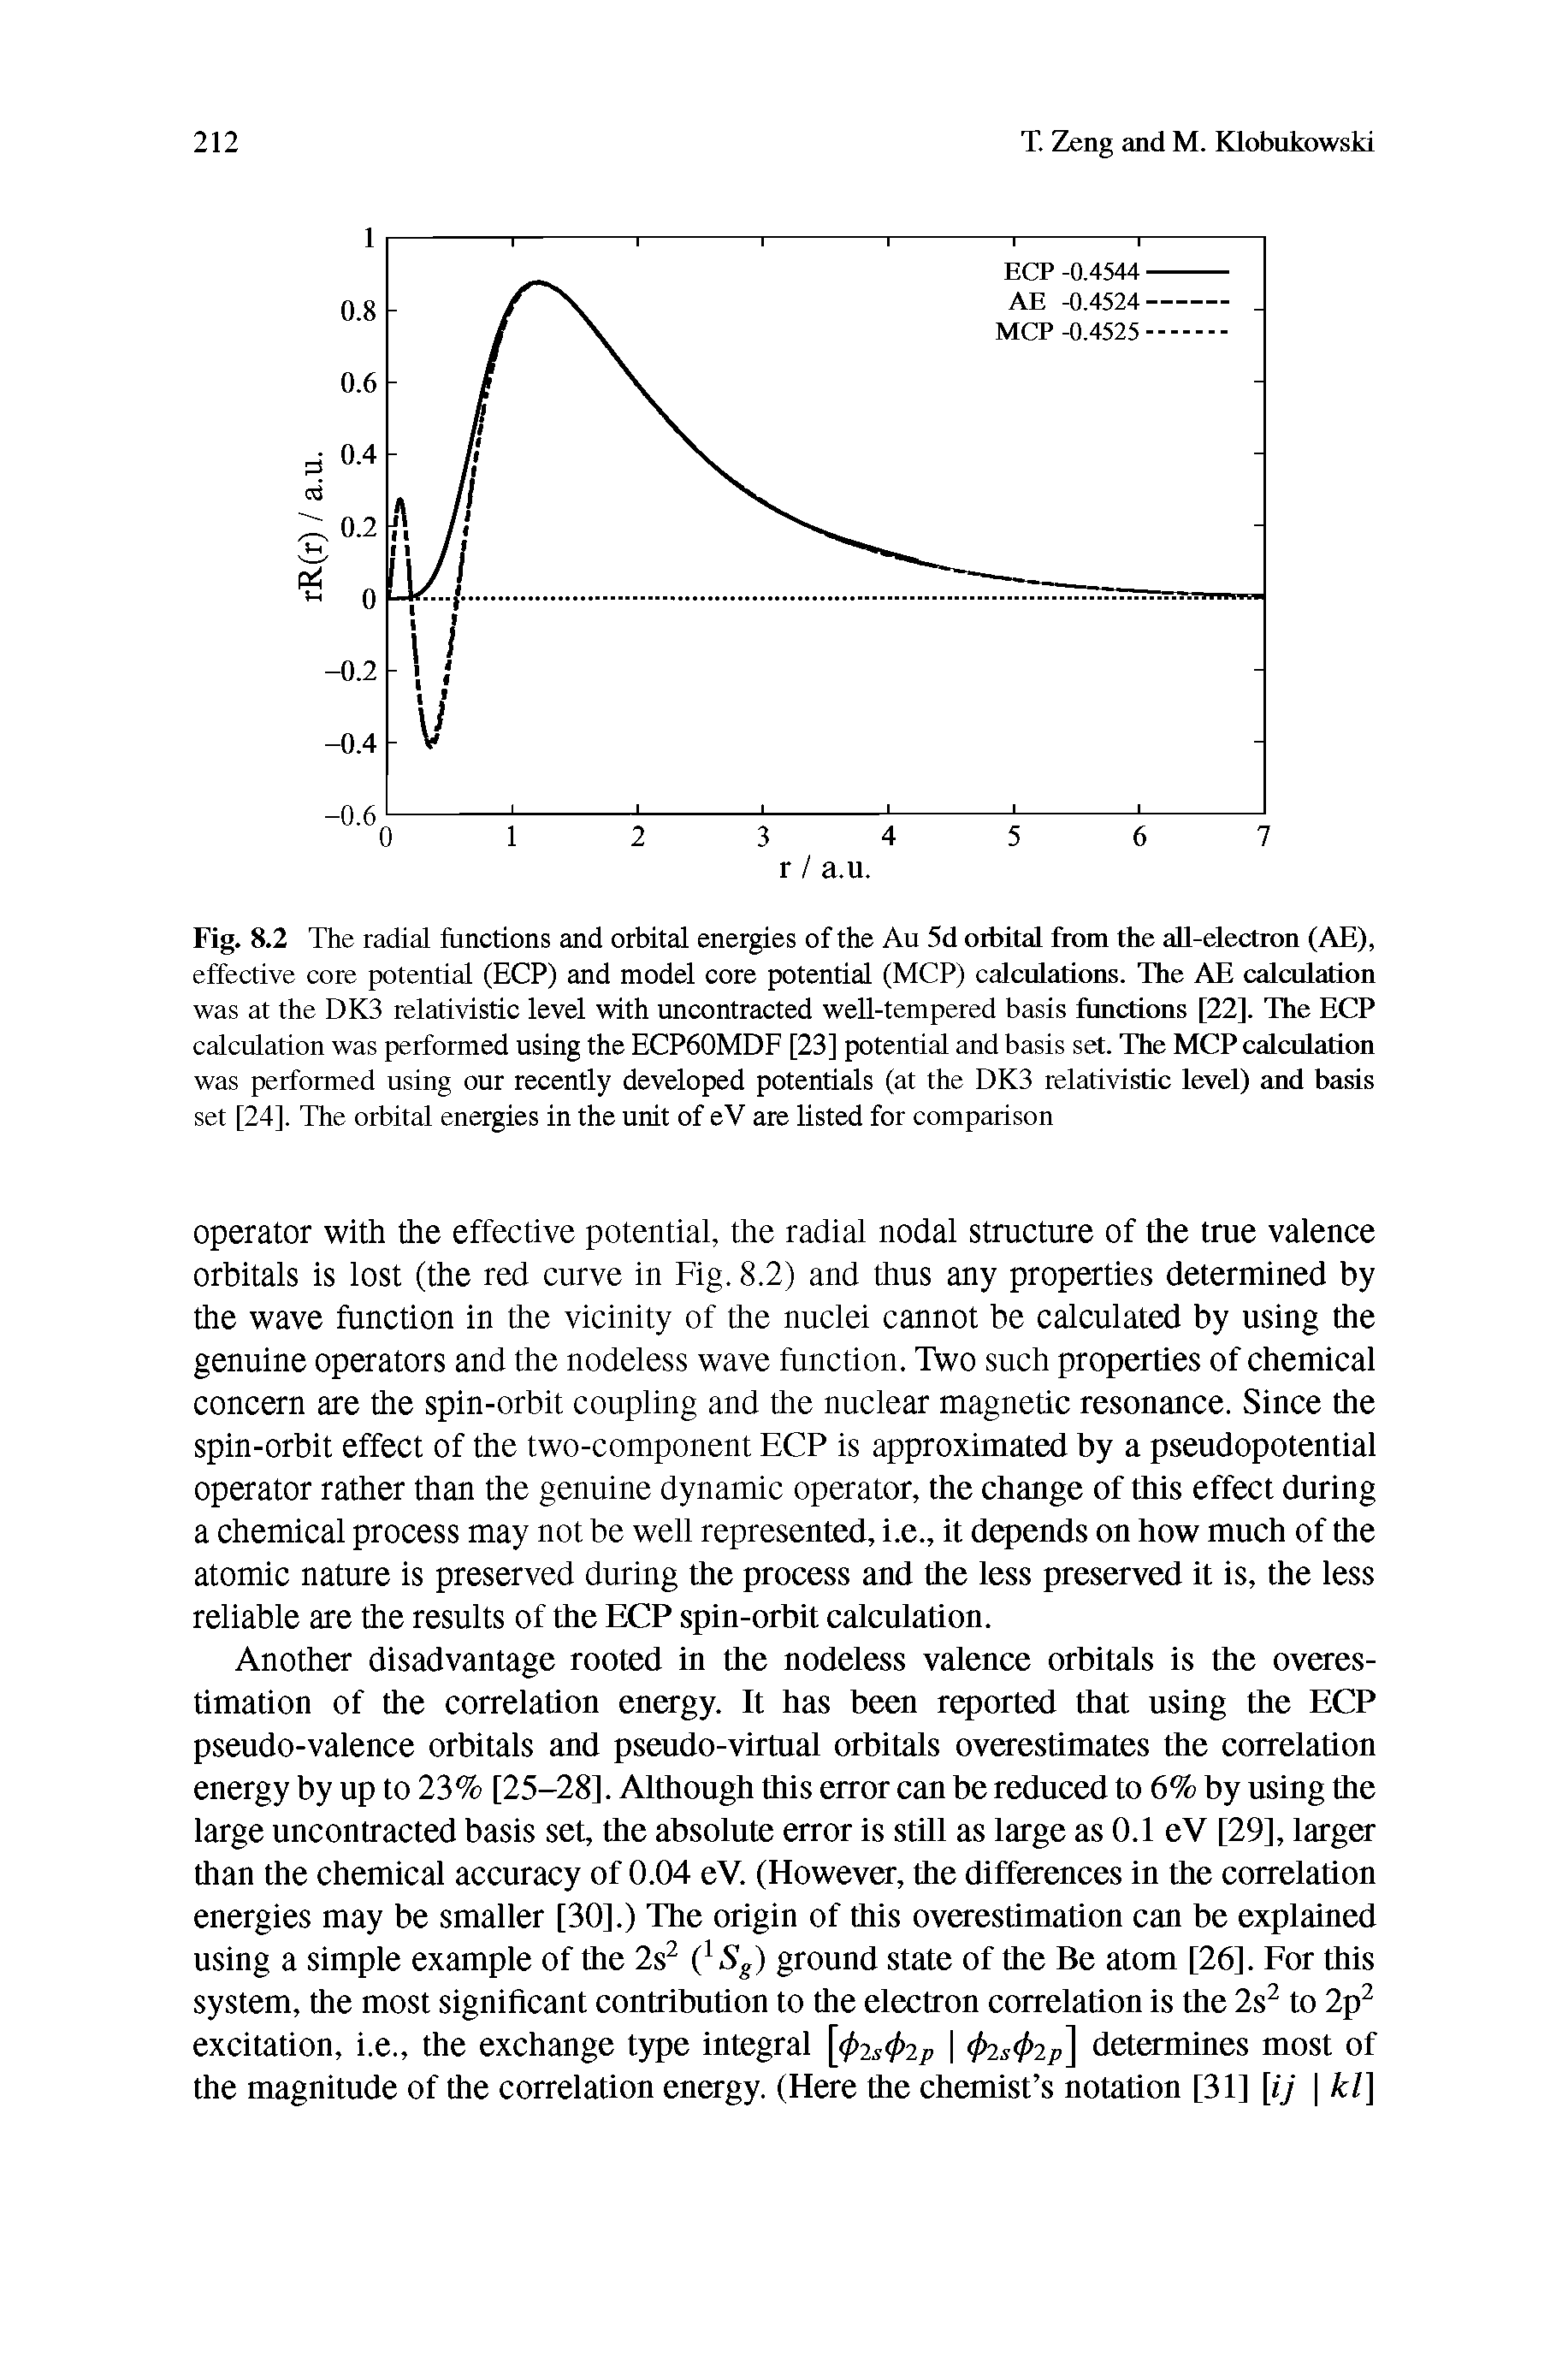 Fig. 8.2 The radial functions and orbital energies of the Au 5d oibital from the all-electron (AE), effective core potential (ECP) and model core potential (MCP) calculations. The AE calculation was at the DK3 relativistic level with uncontracted well-tempered basis fimctions [22], The ECP calculation was performed using the ECP60MDF [23] potential and basis set. The MCP calculation was performed using our recently developed potentials (at the DK3 relativistic level) and basis set [24]. The orbital energies in the unit of eV are listed for comparison...